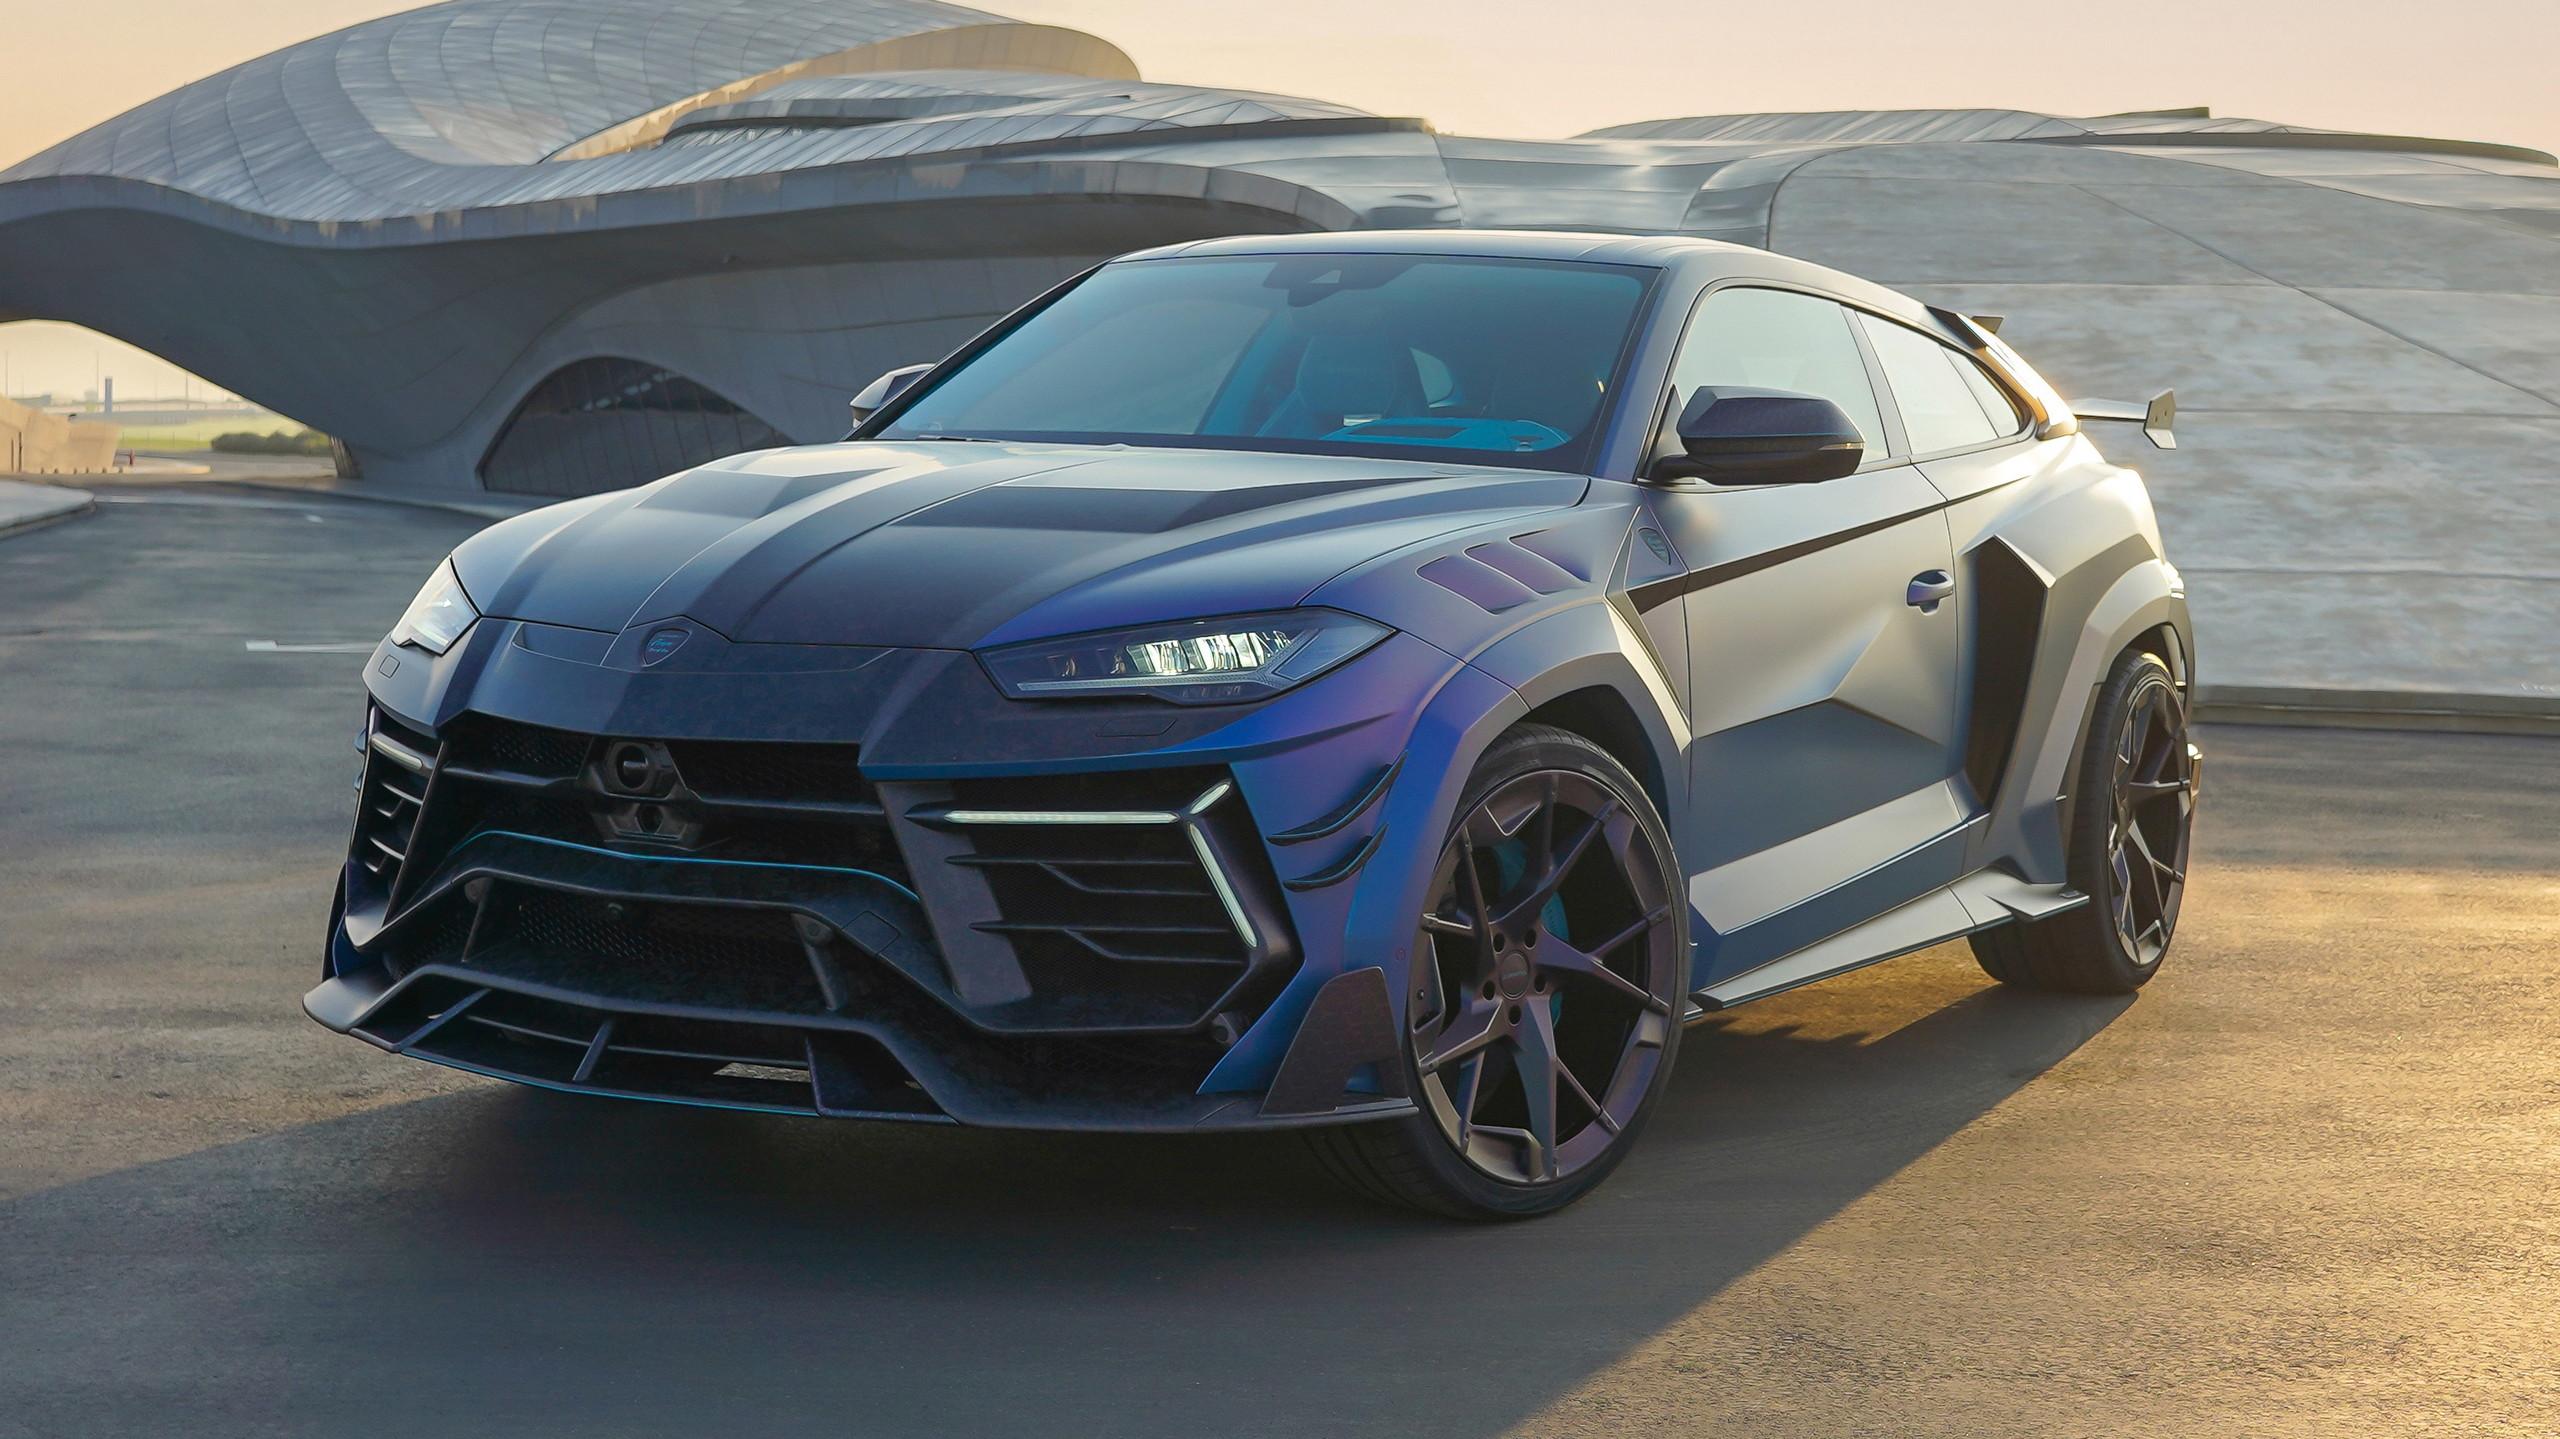 The Two Door Lamborghini Urus Coupe Is Stupidest Car Of